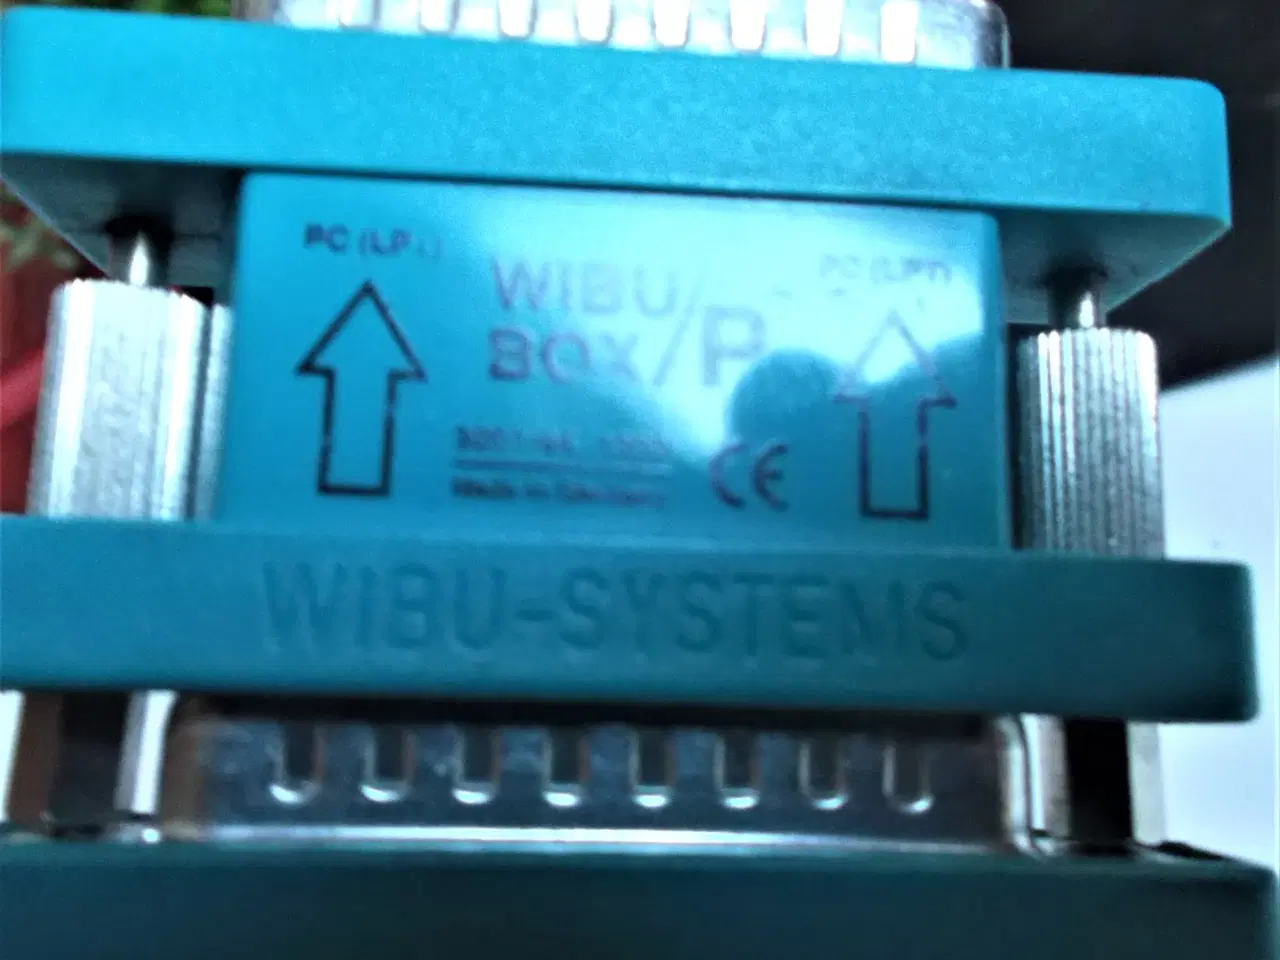 Billede 4 - Wibu-Box/P is the WibuKey protection hardware